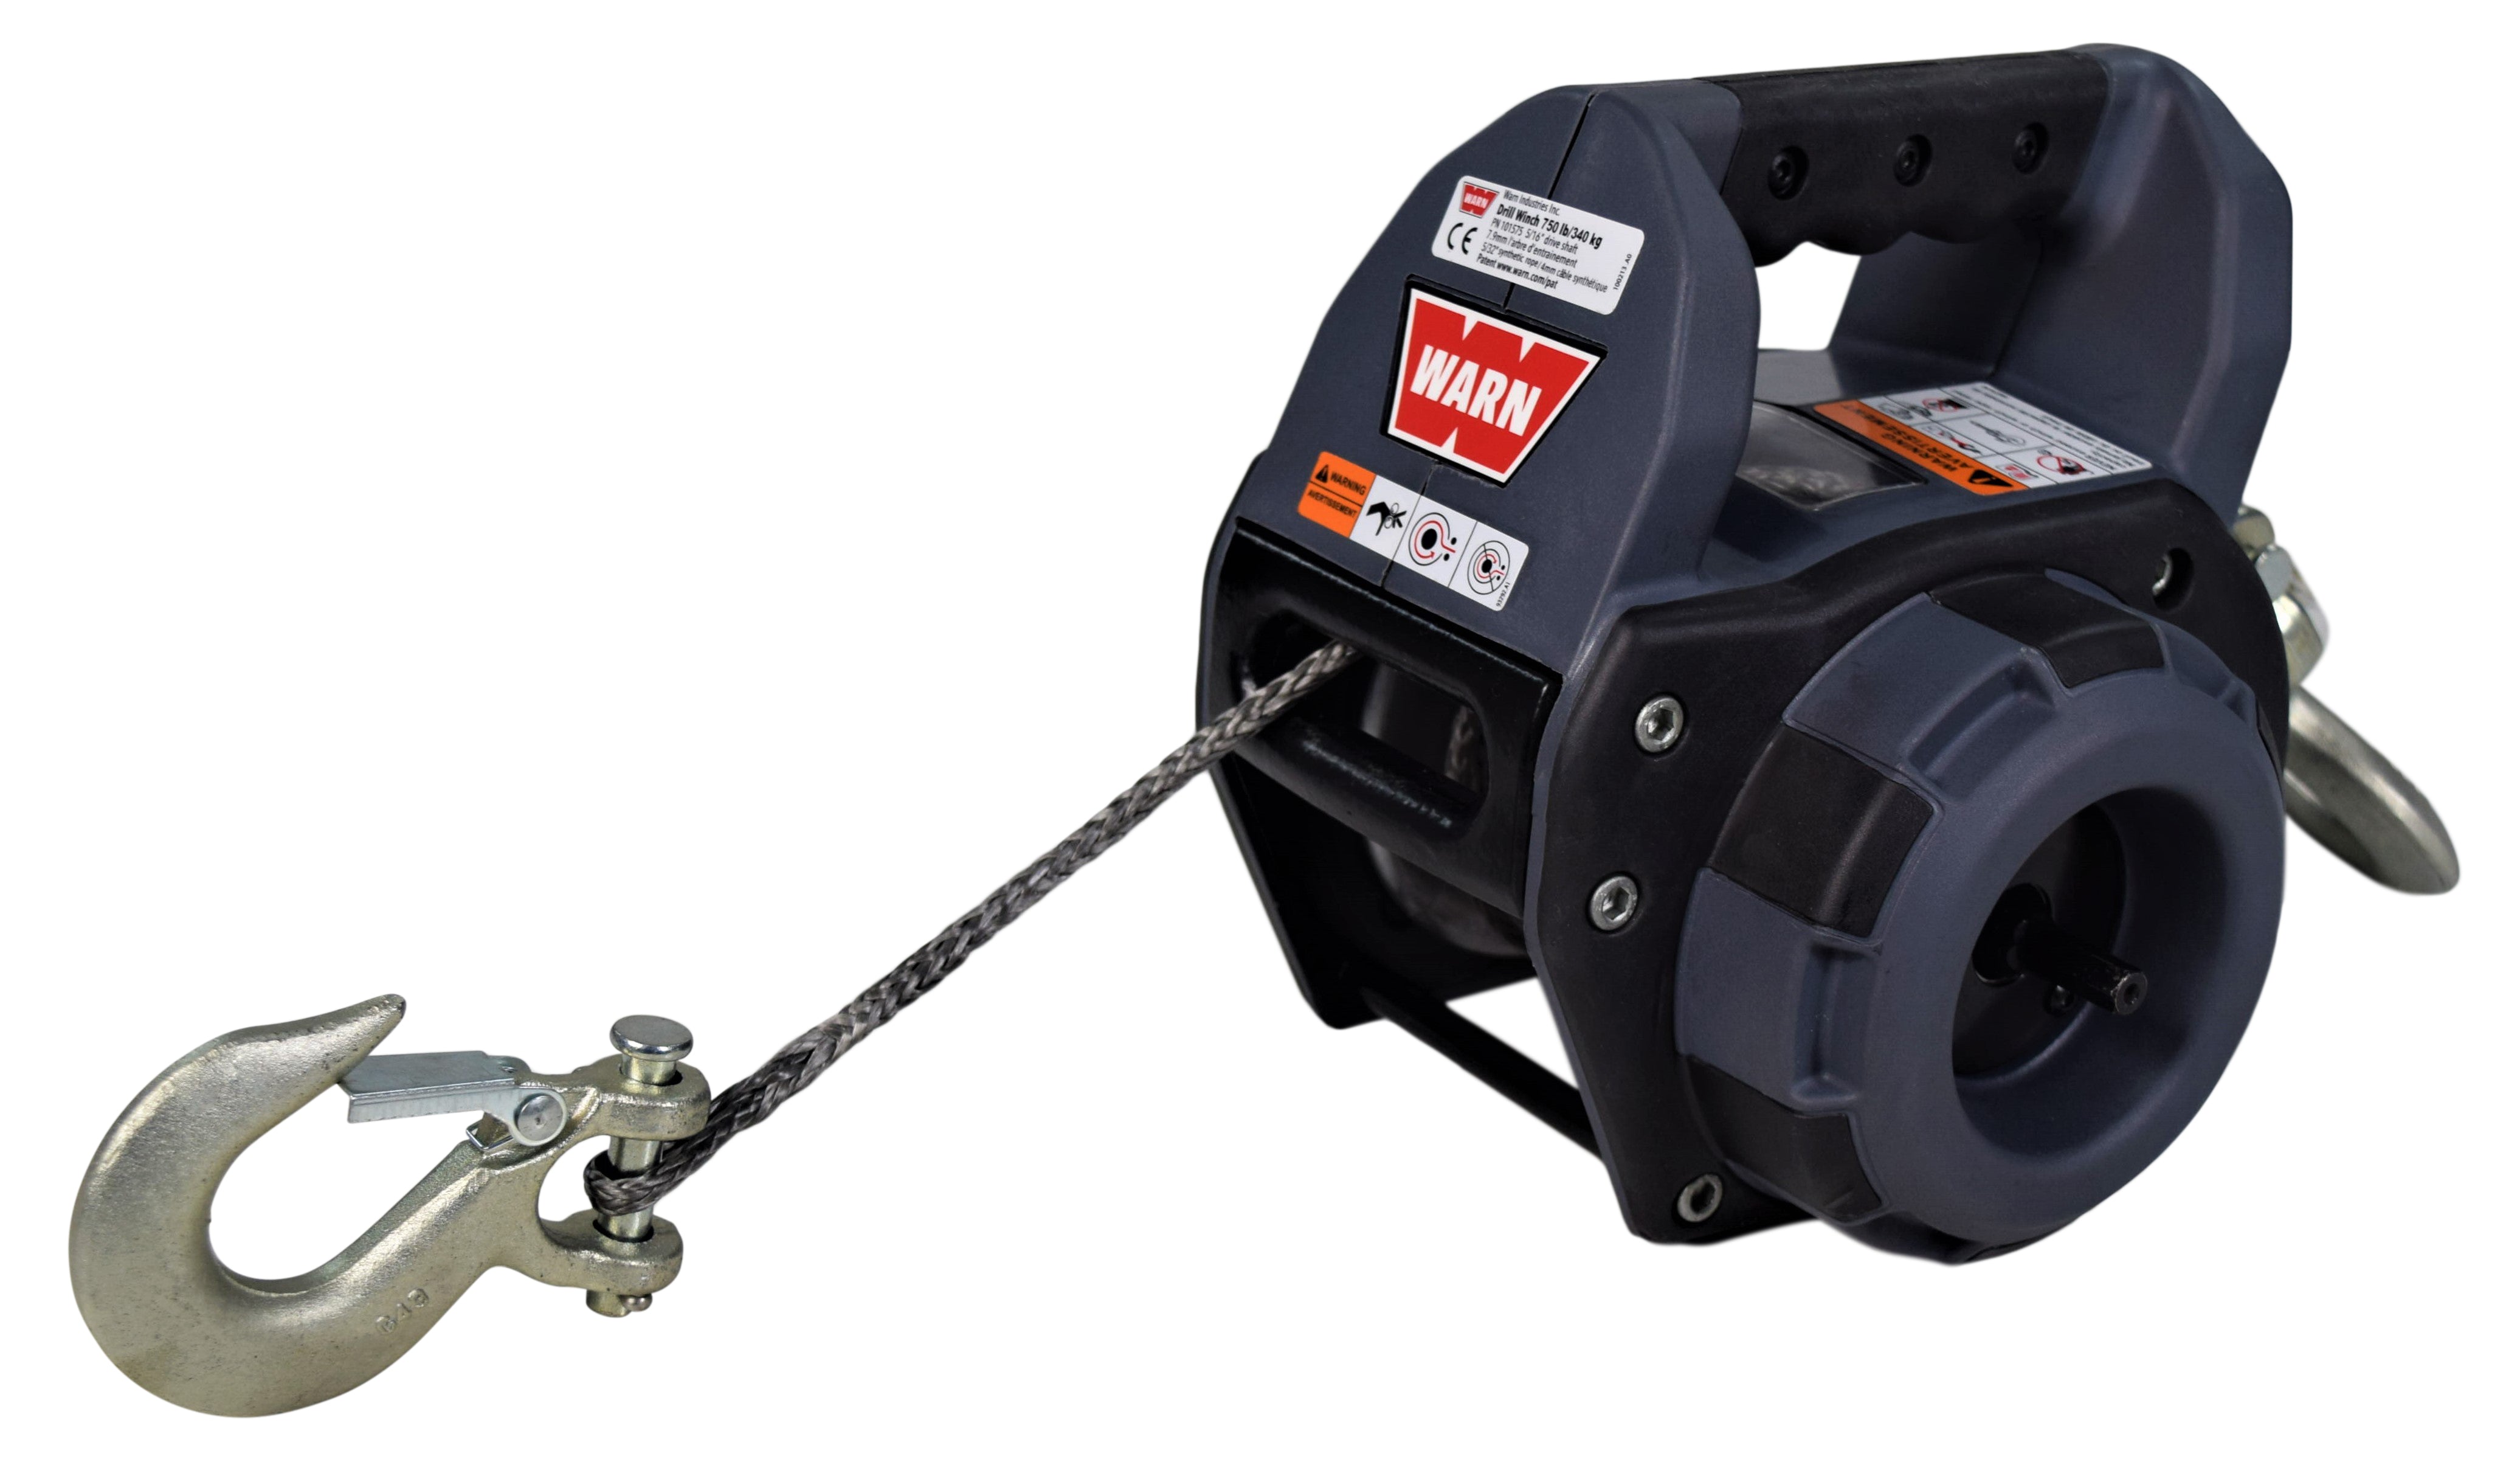 Warn-101575-Drill-Winch-750-lbs-Capacity-40-Synthetic-Rope-Free-spool-Clutch-image-7